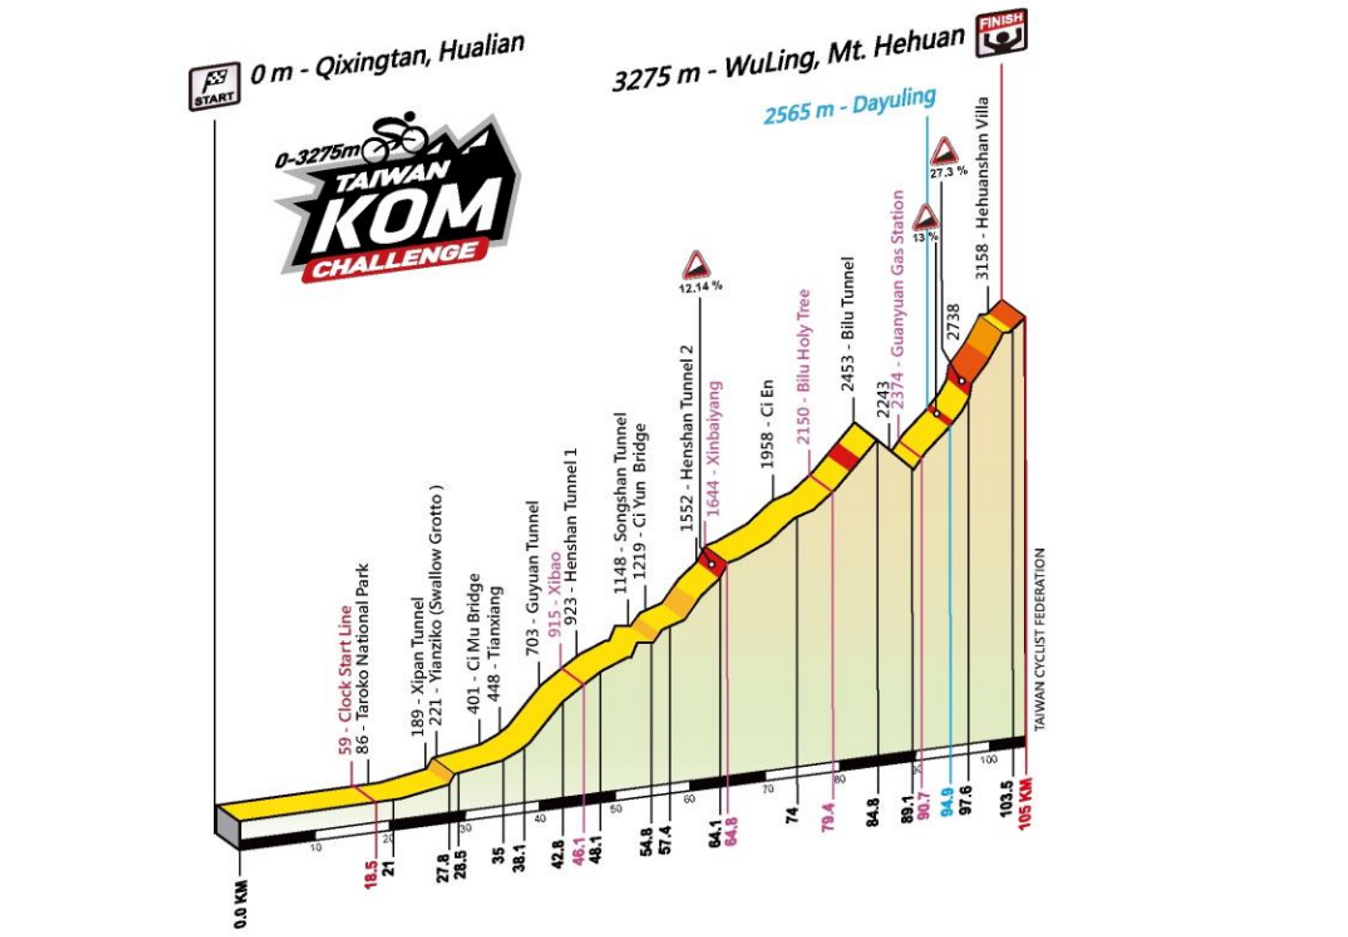 The profile of the Taiwan KOM Challenge